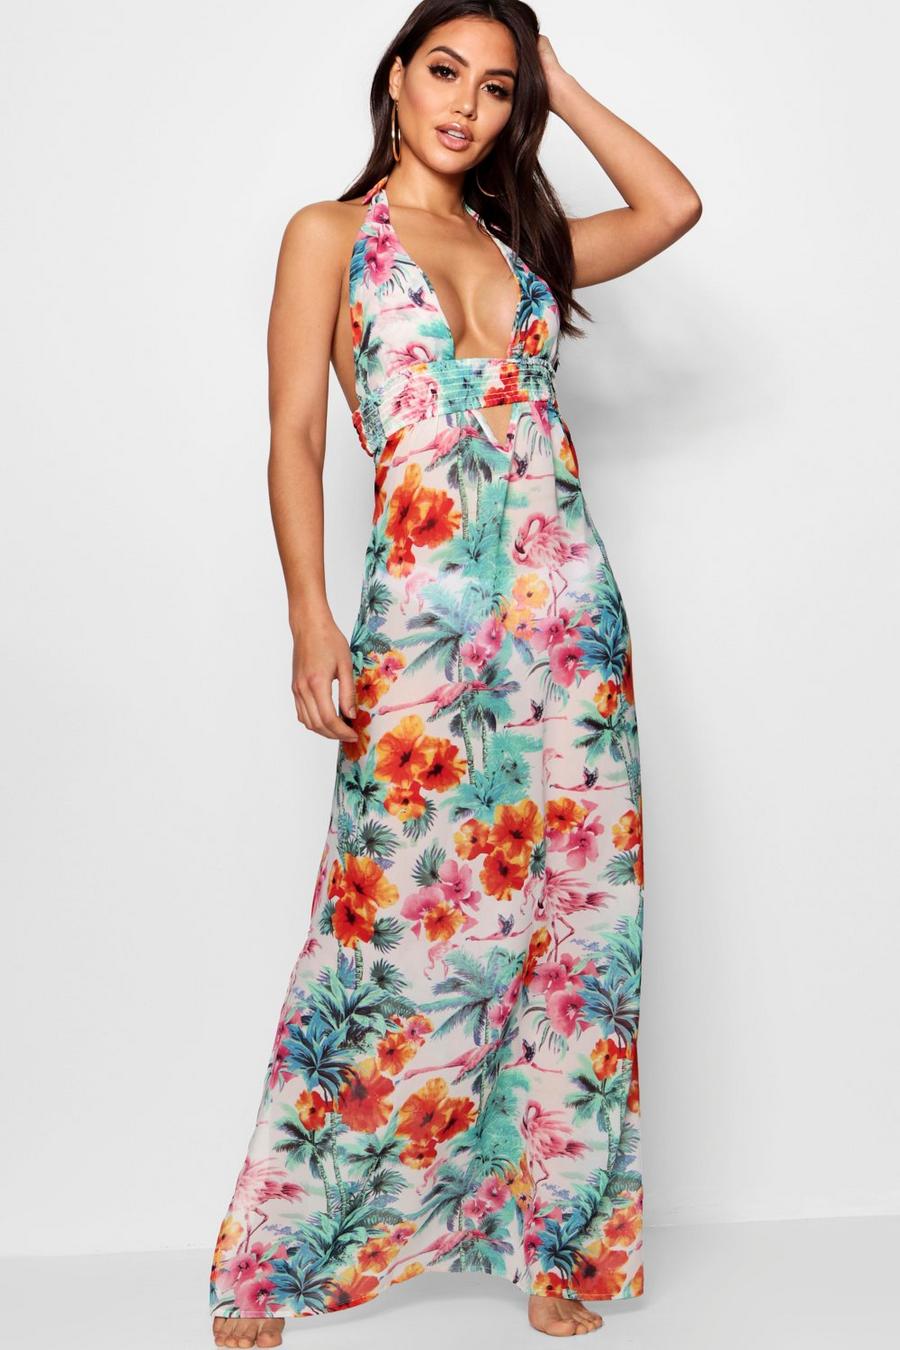 Robe Maxi de plage Tropical flamant rose image number 1